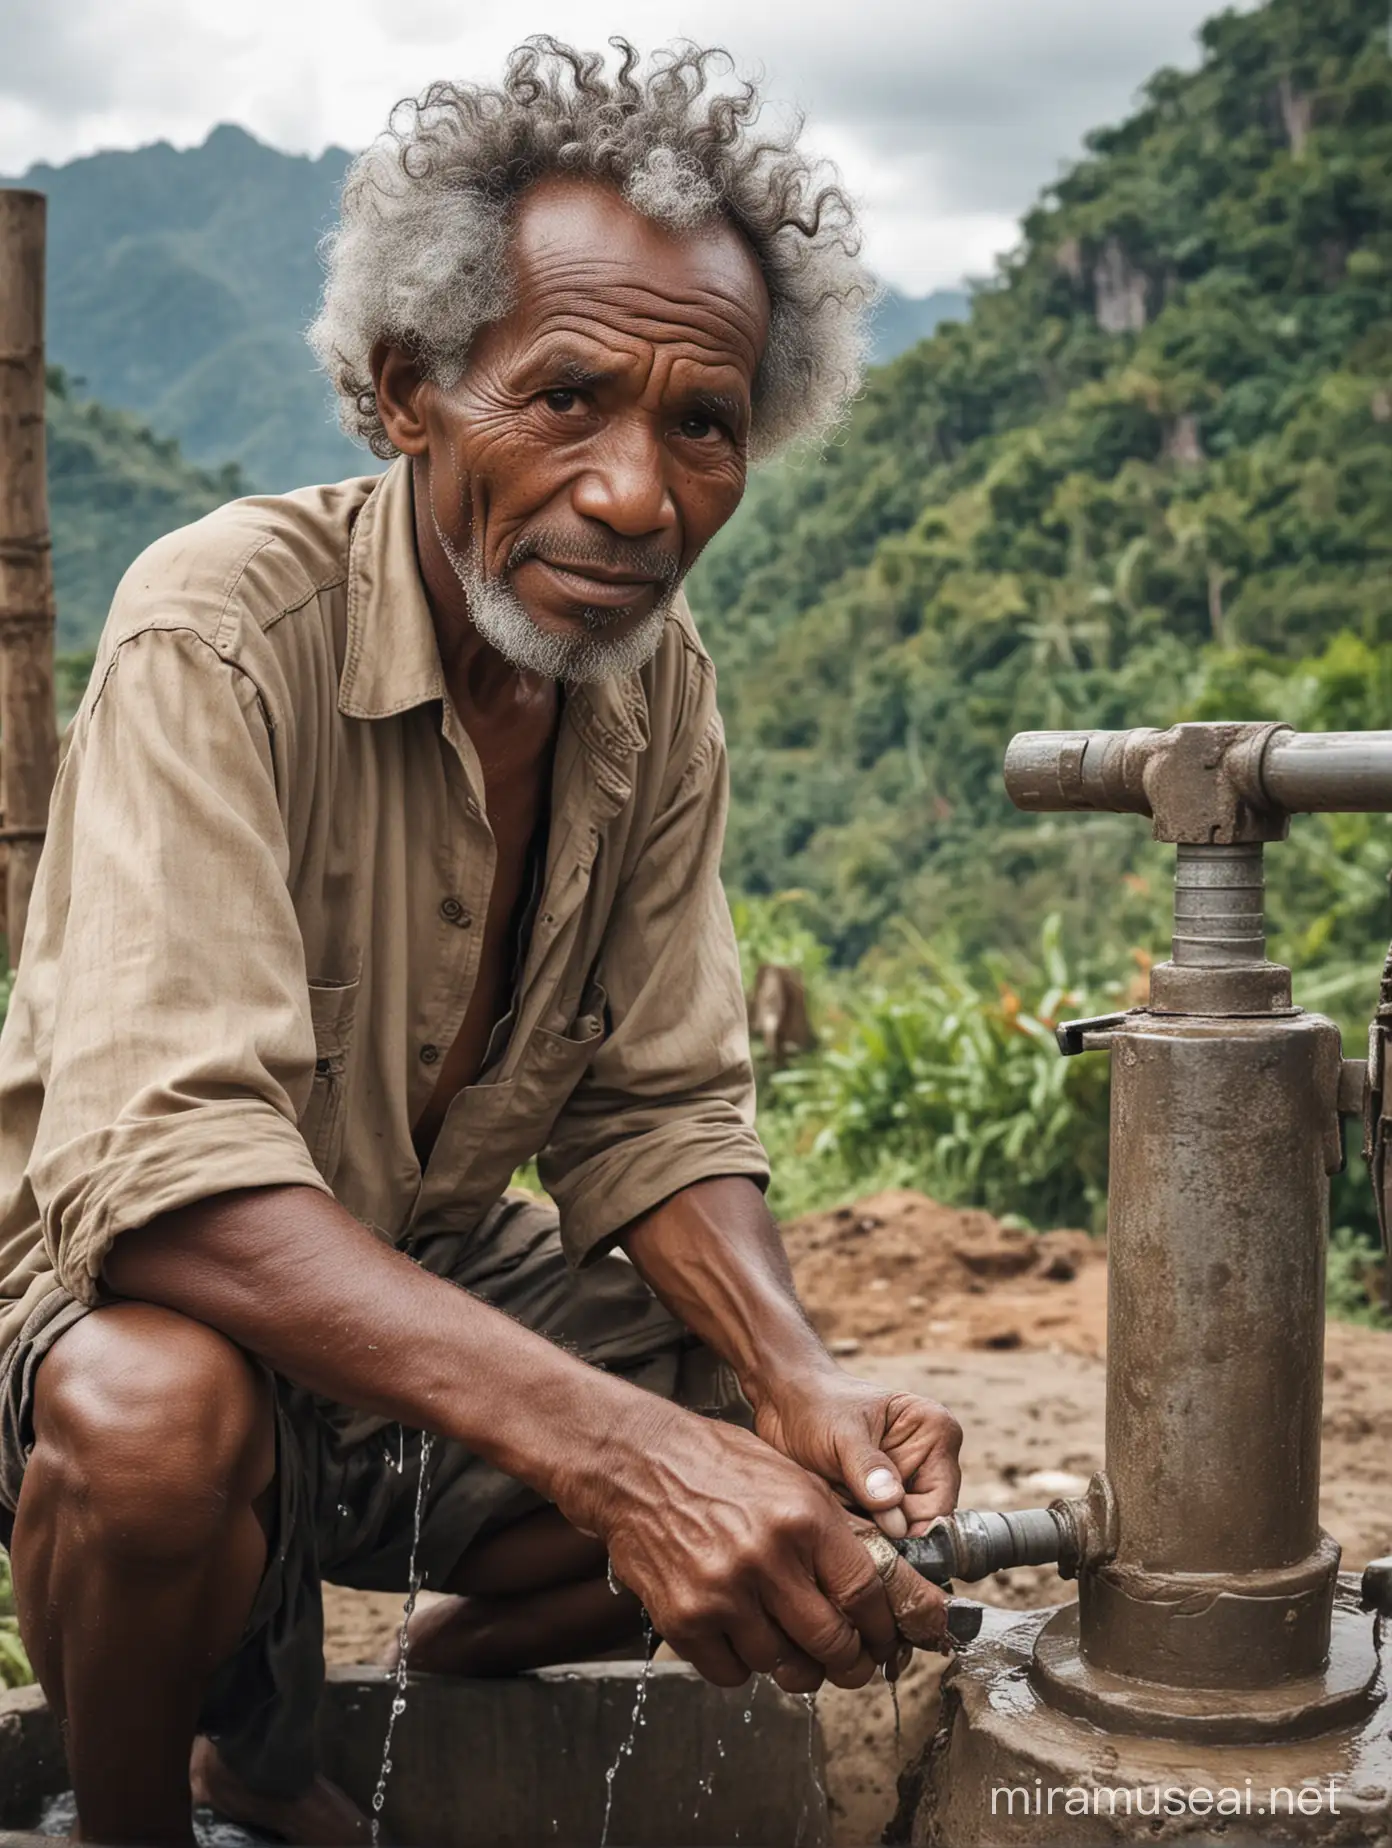 Elderly Papuan Man Repairing Water Well with Scenic View